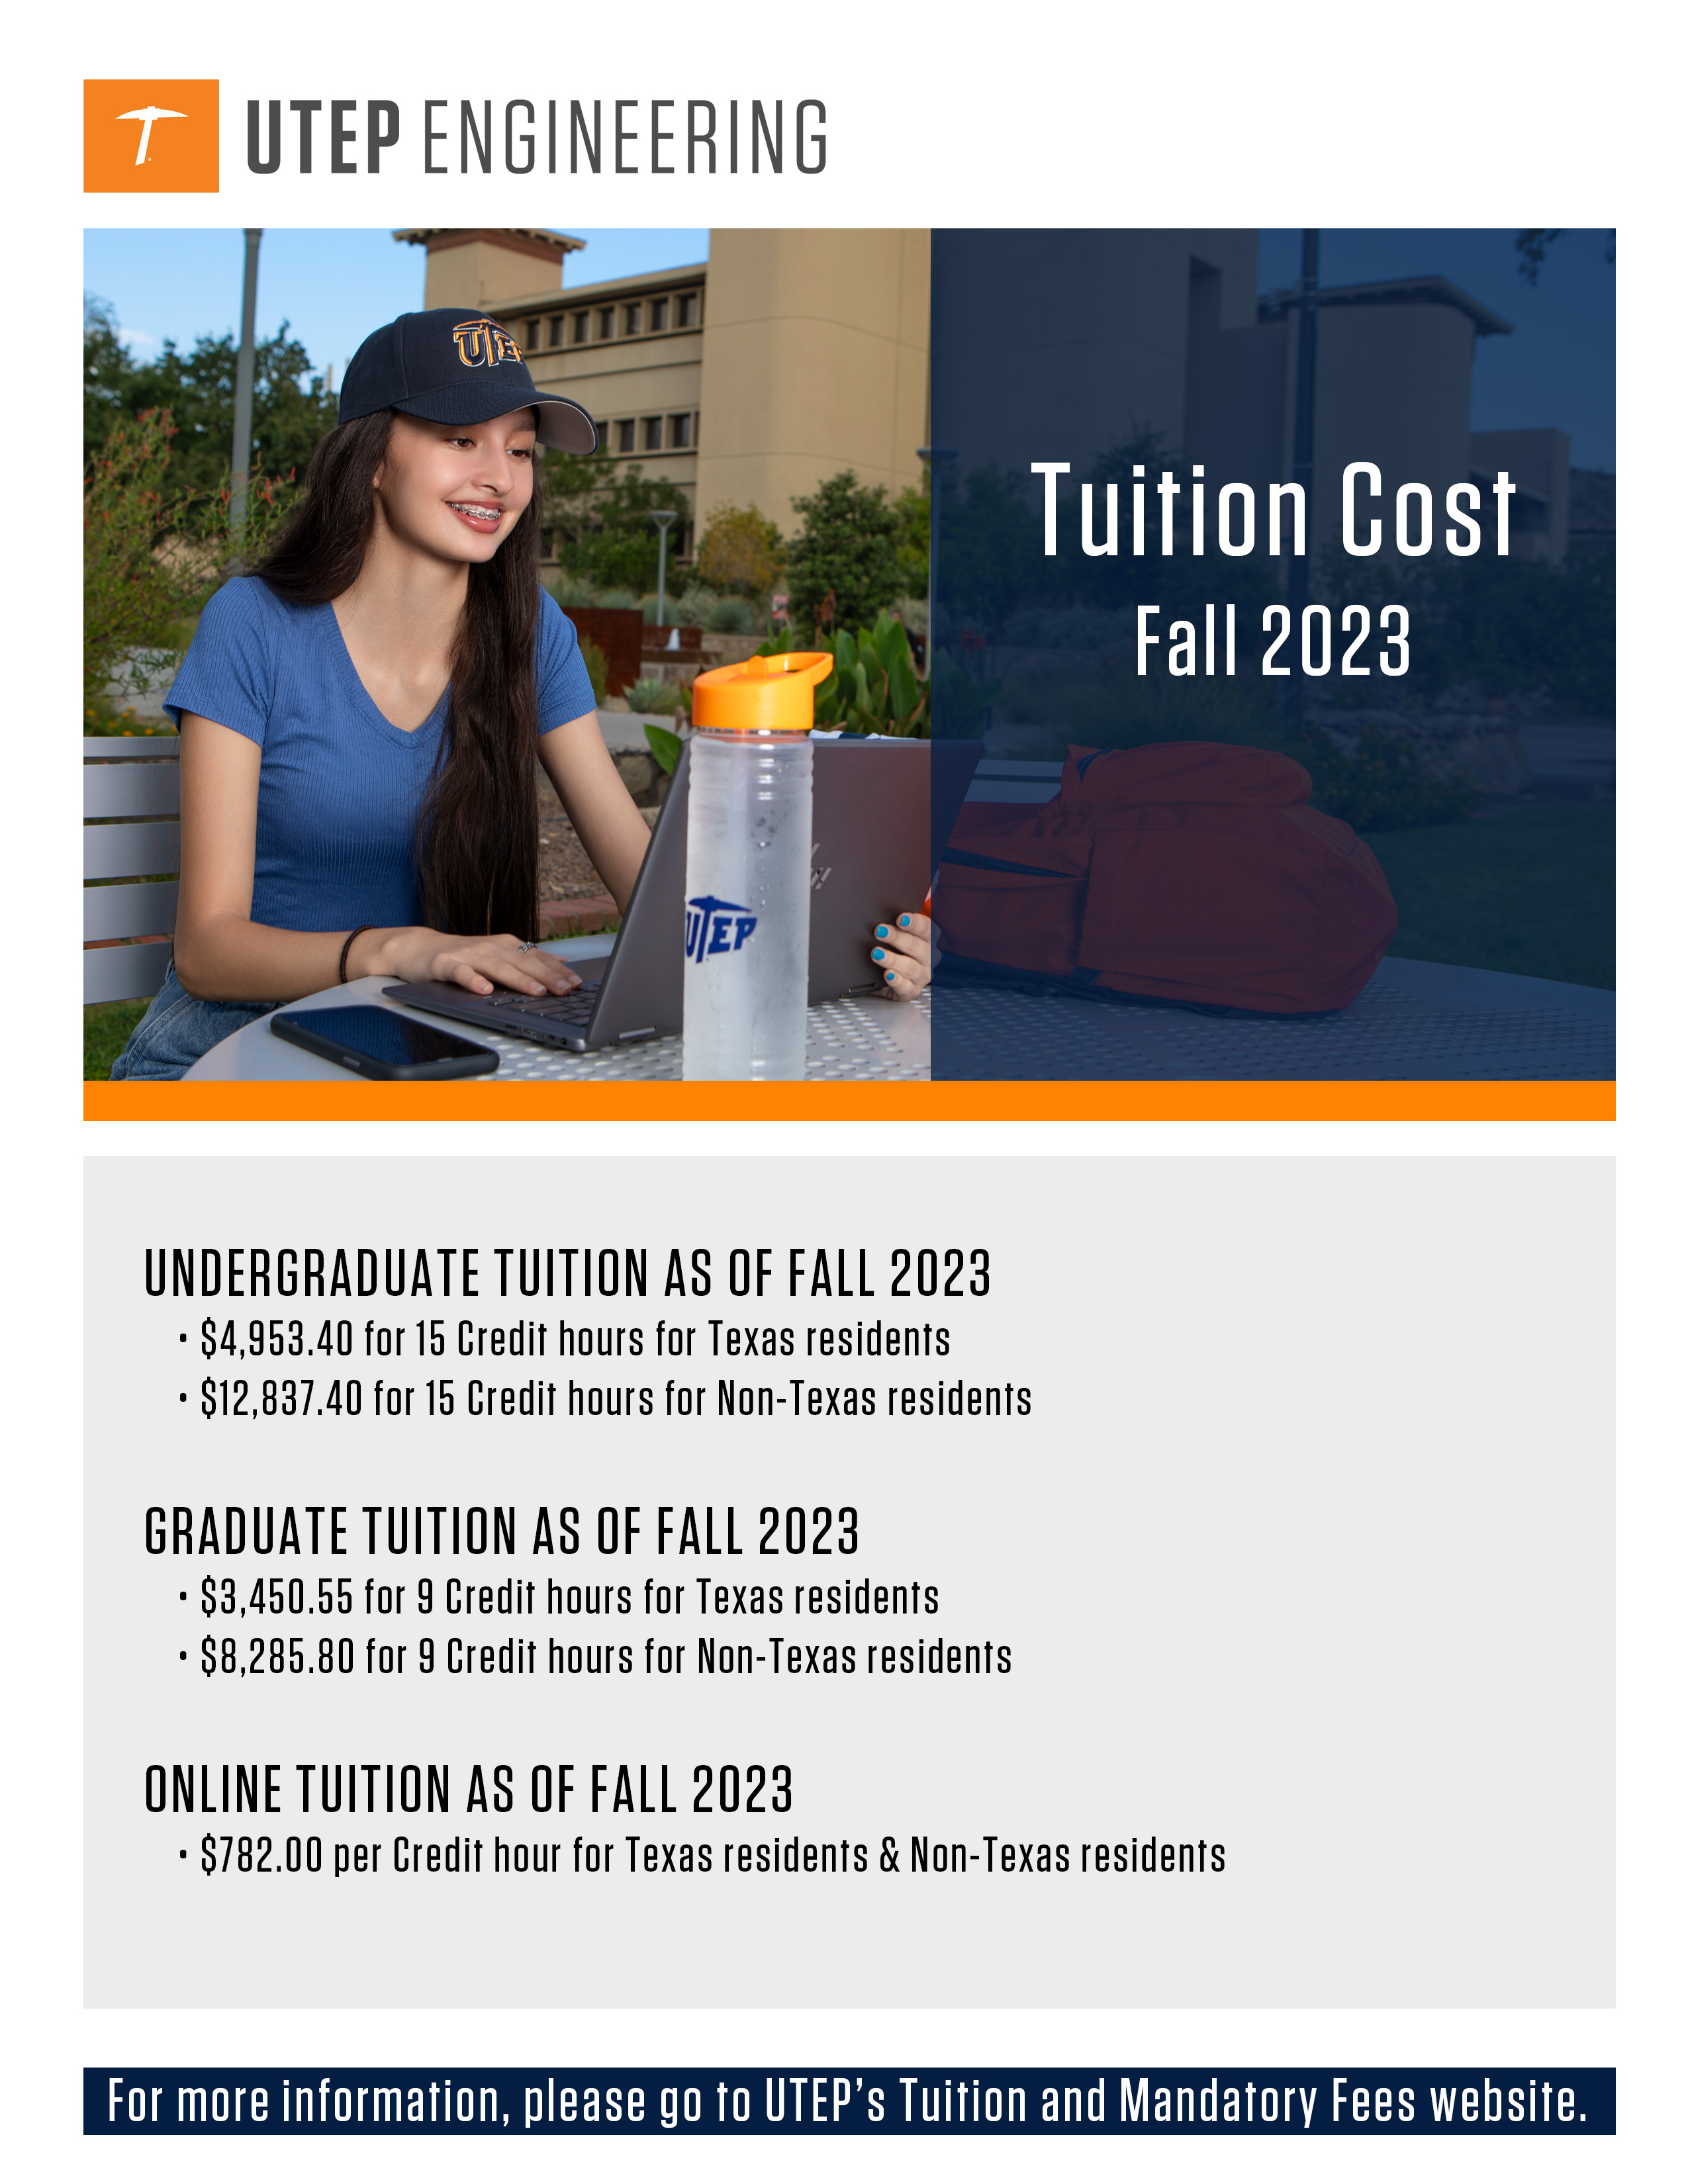 Tuition cost